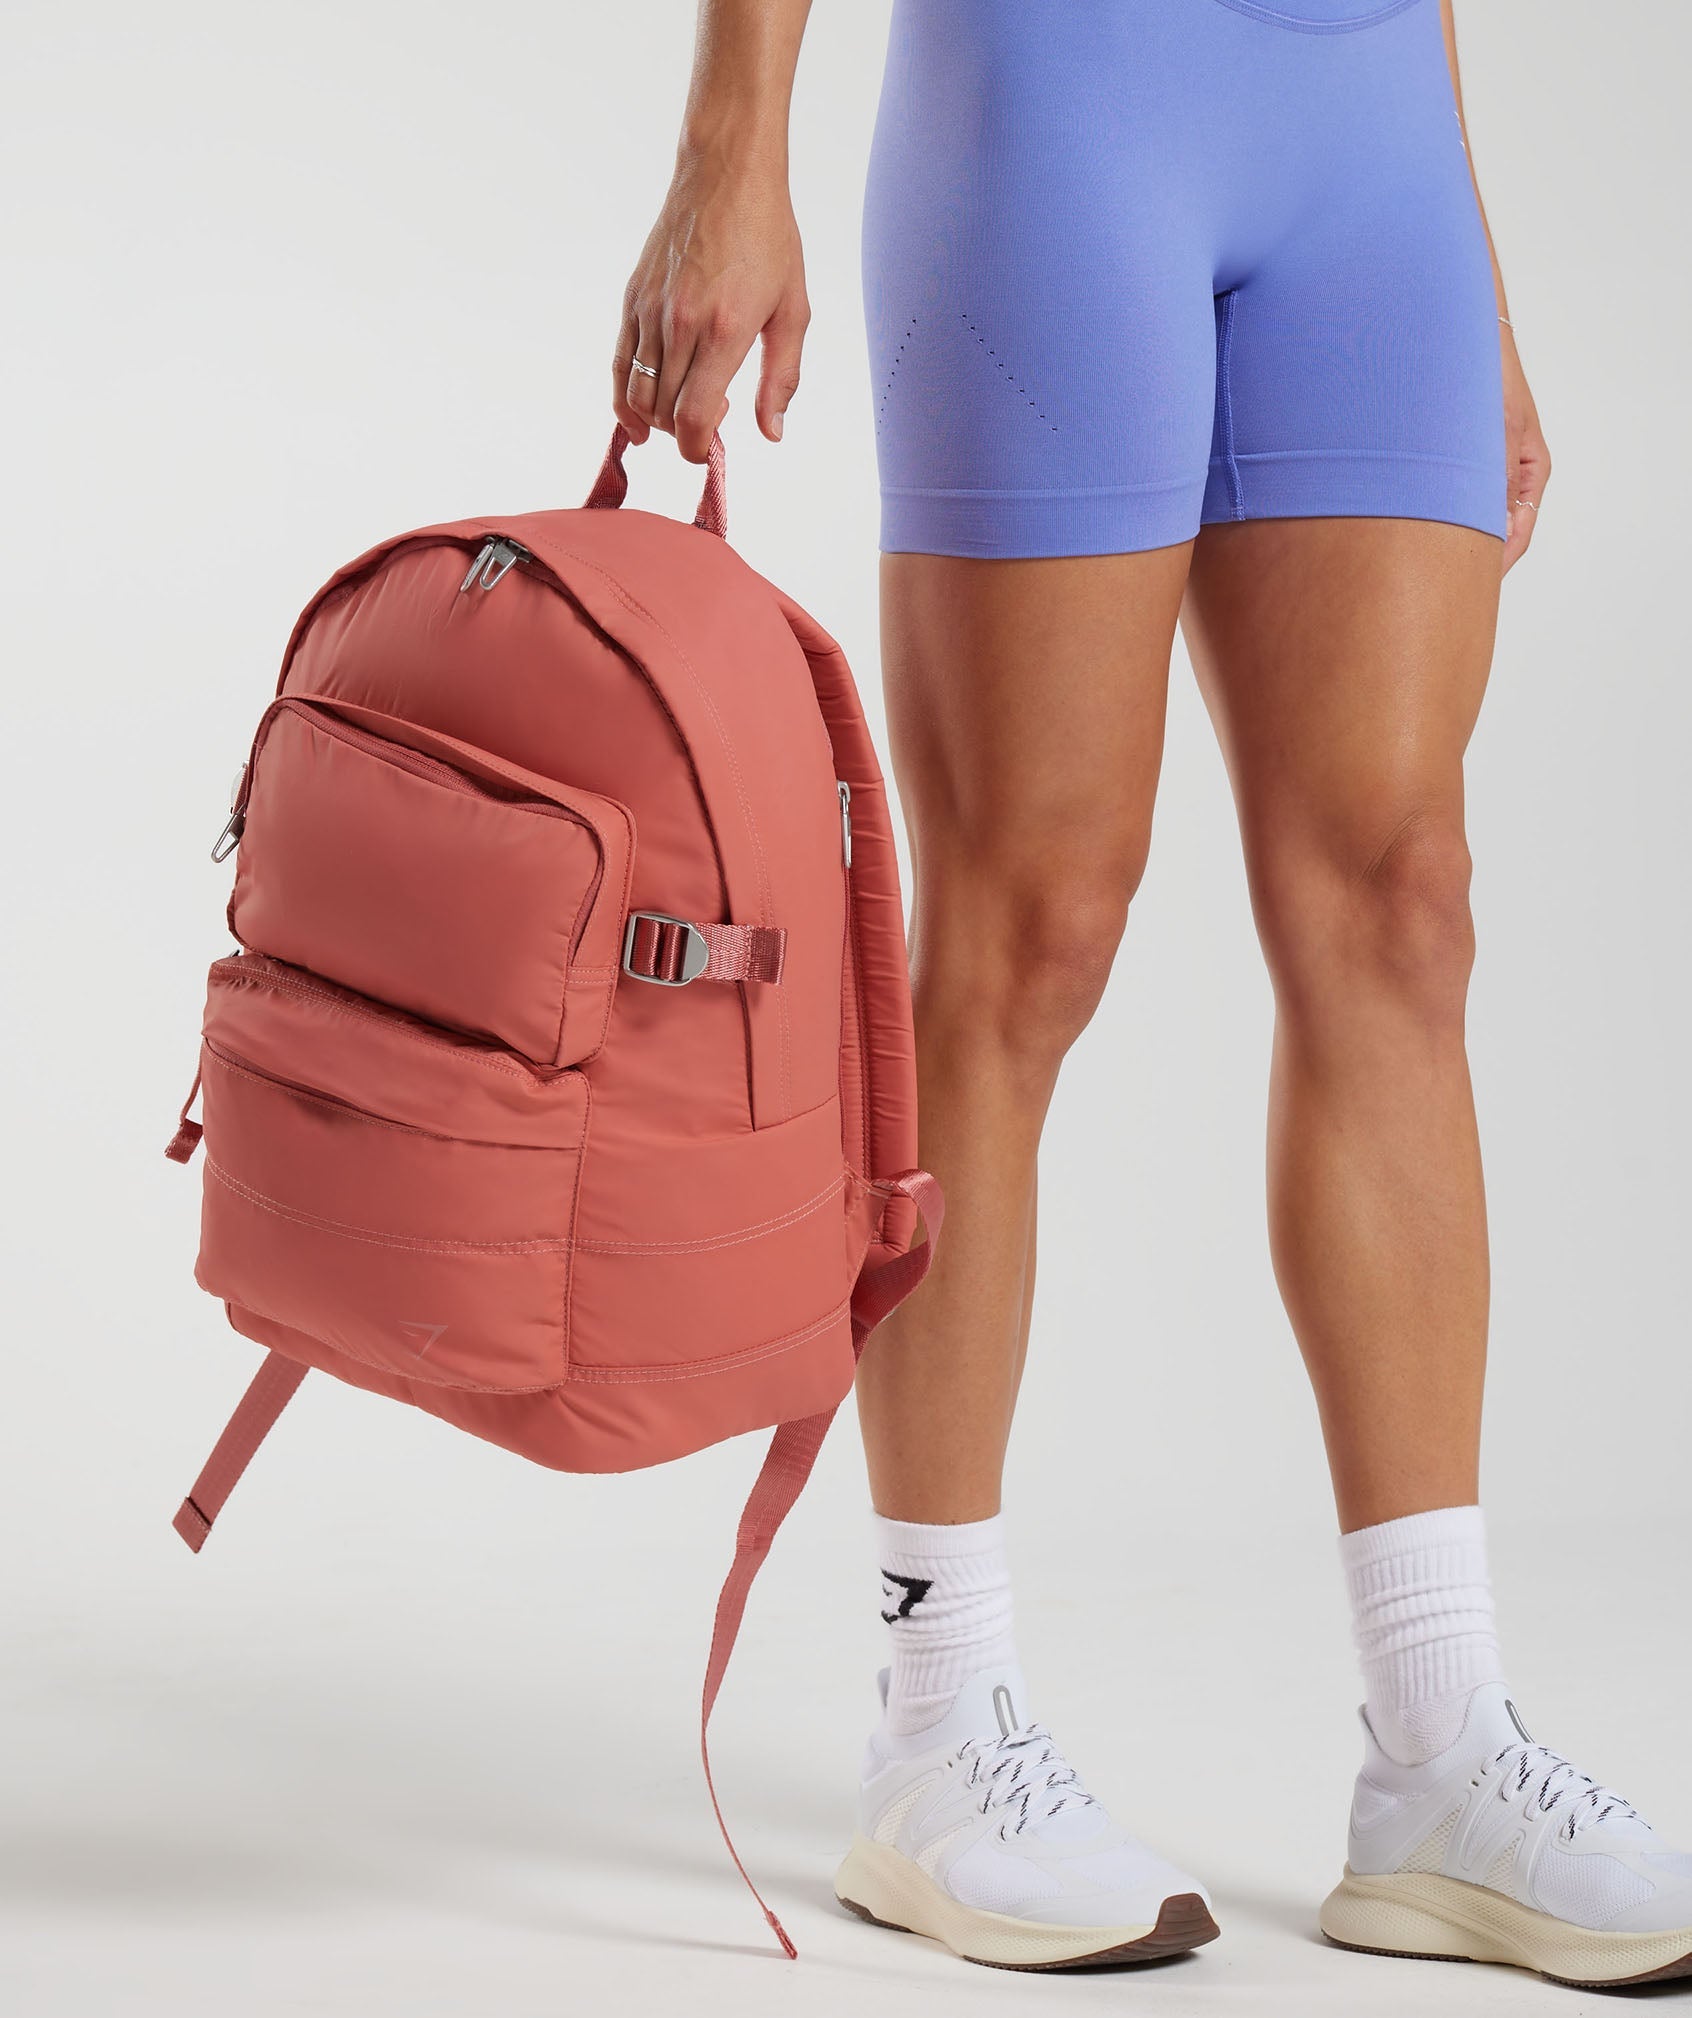 Premium Lifestyle Backpack in Terracotta Pink - view 4